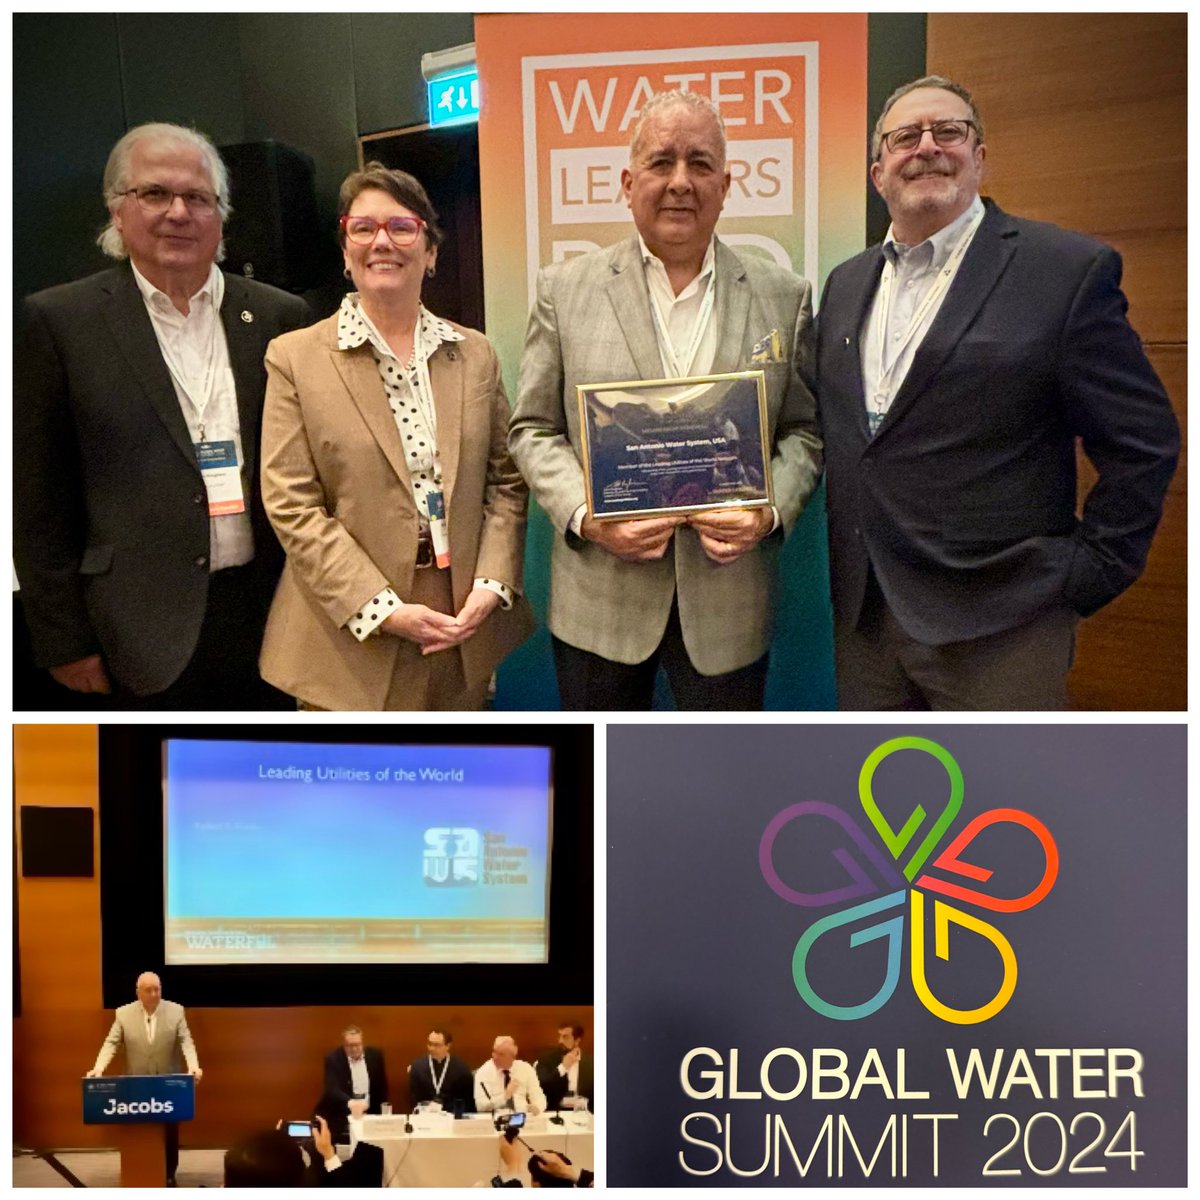 President/CEO Robert Puente recently accepted a certificate acknowledging SAWS’ continued membership in the Leading Utilities of the World, an exclusive global network of water & #wastewater utilities. SAWS was first inducted into the organization in 2017. Inductees must be